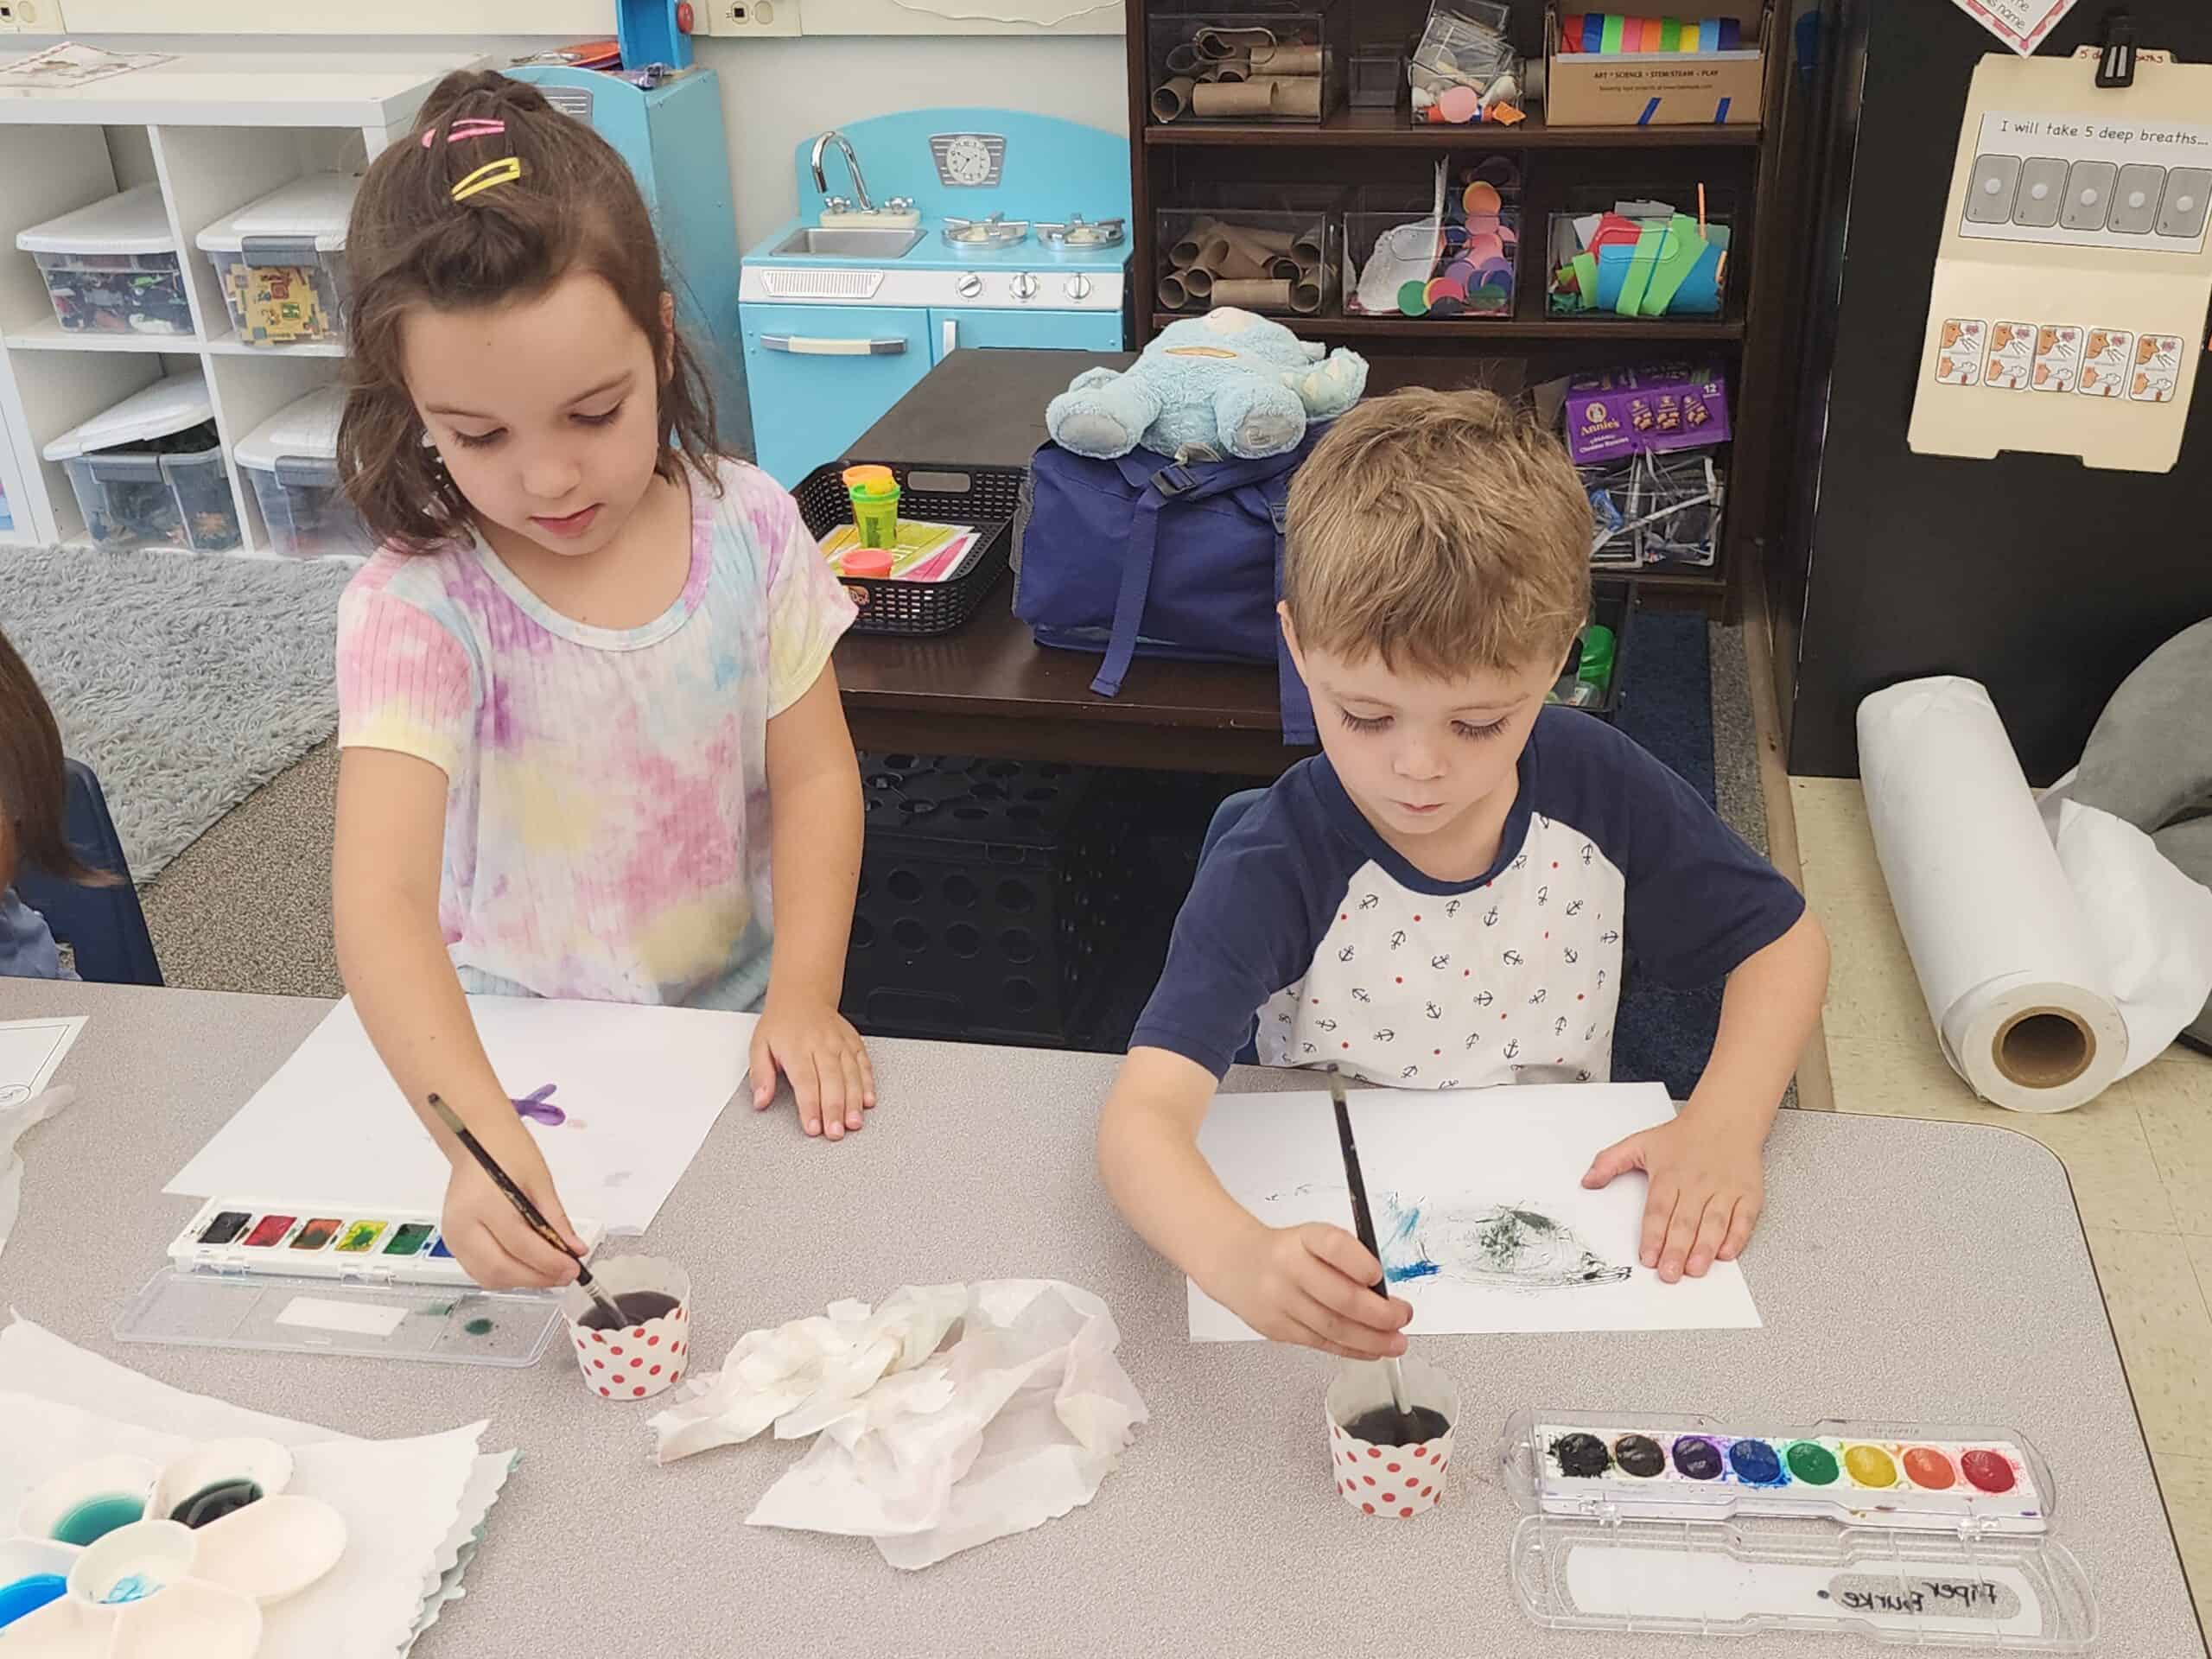 Two students painting at Kinder Camp.